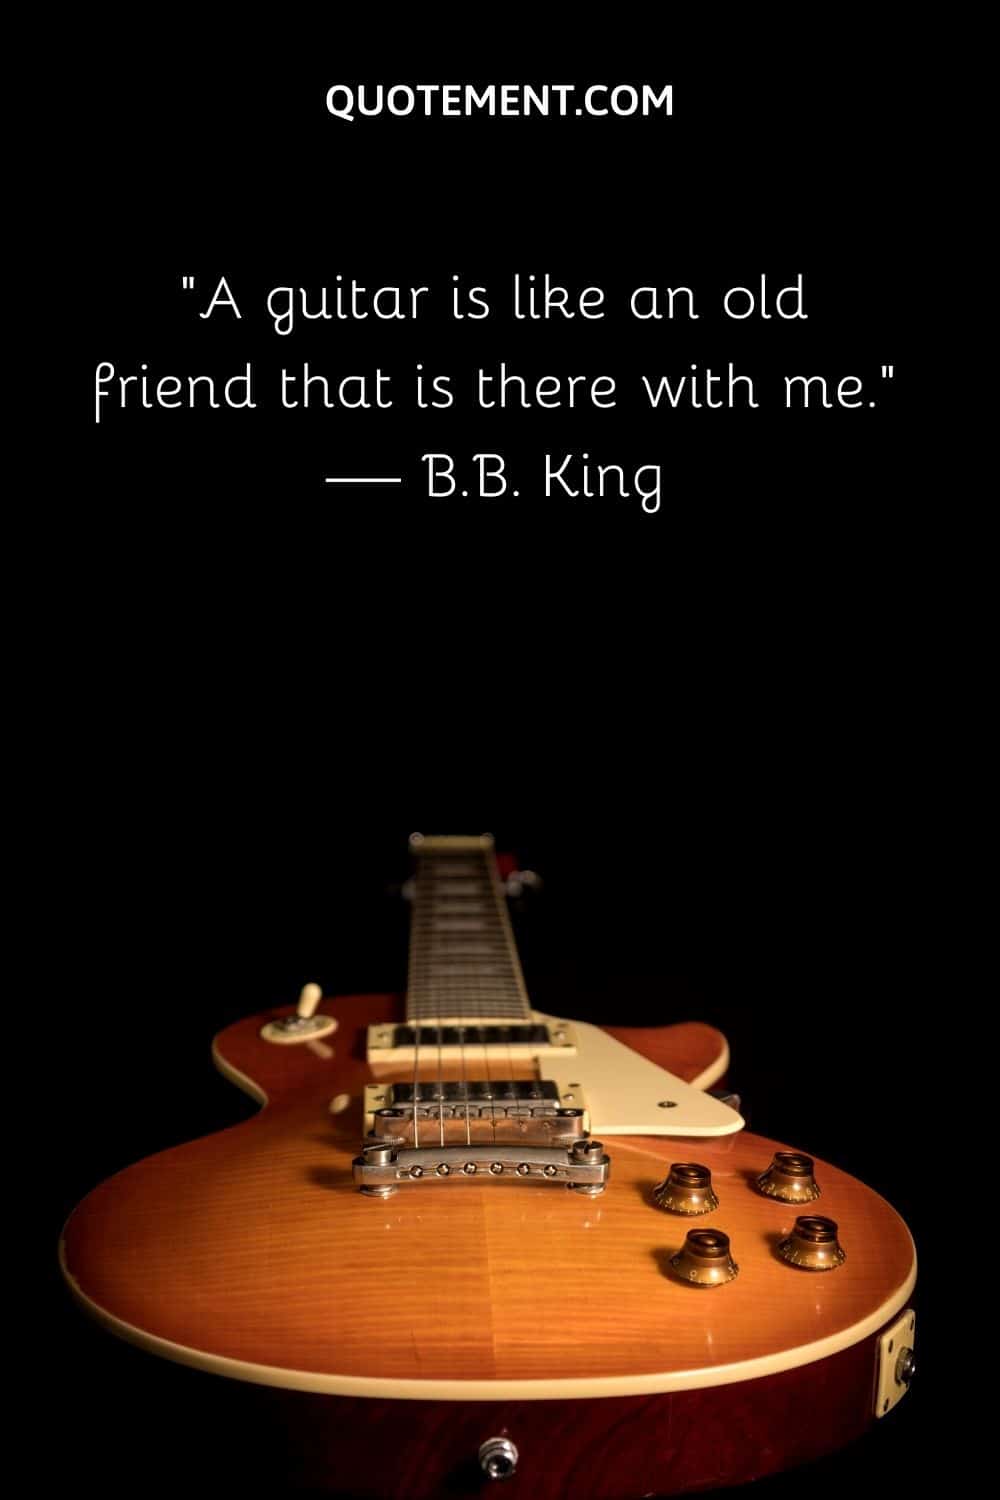 A guitar is like an old friend that is there with me.